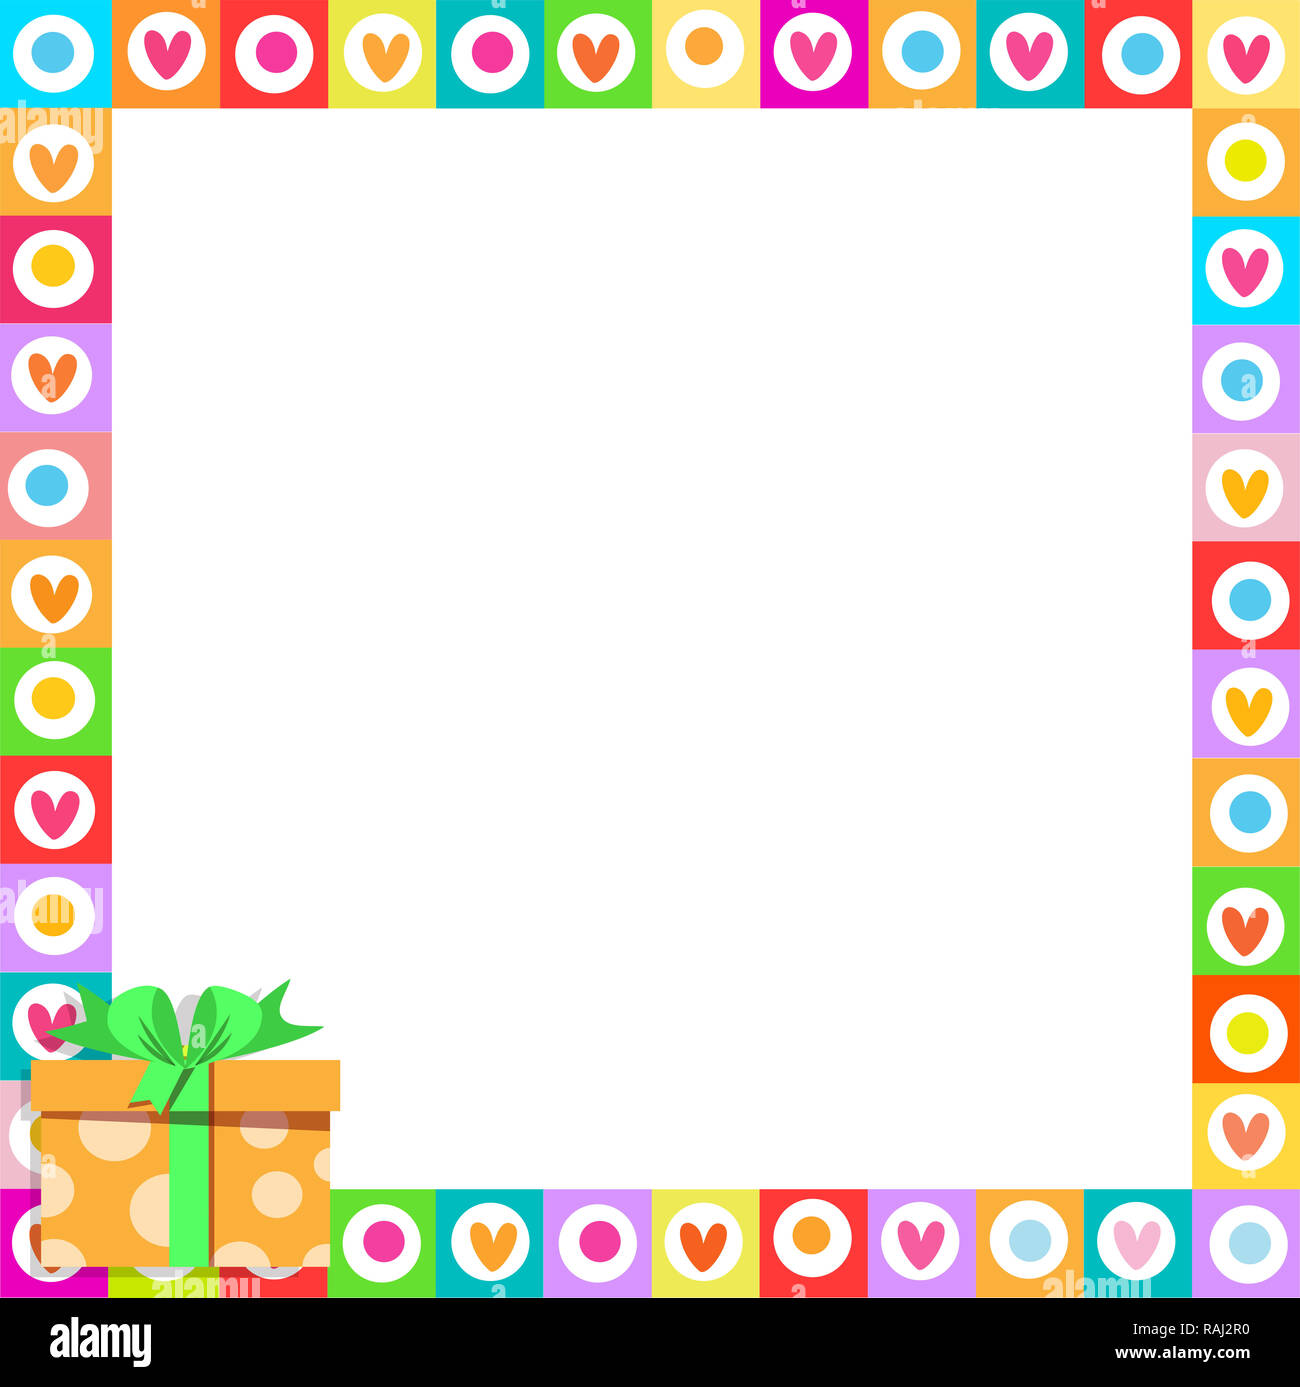 Frustratie Onleesbaar bedrag cute vibrant border photo frame made of doodle hearts with orange gift box  with ribbon in corner. Rainbow colored template with copyspace for Valentin  Stock Photo - Alamy